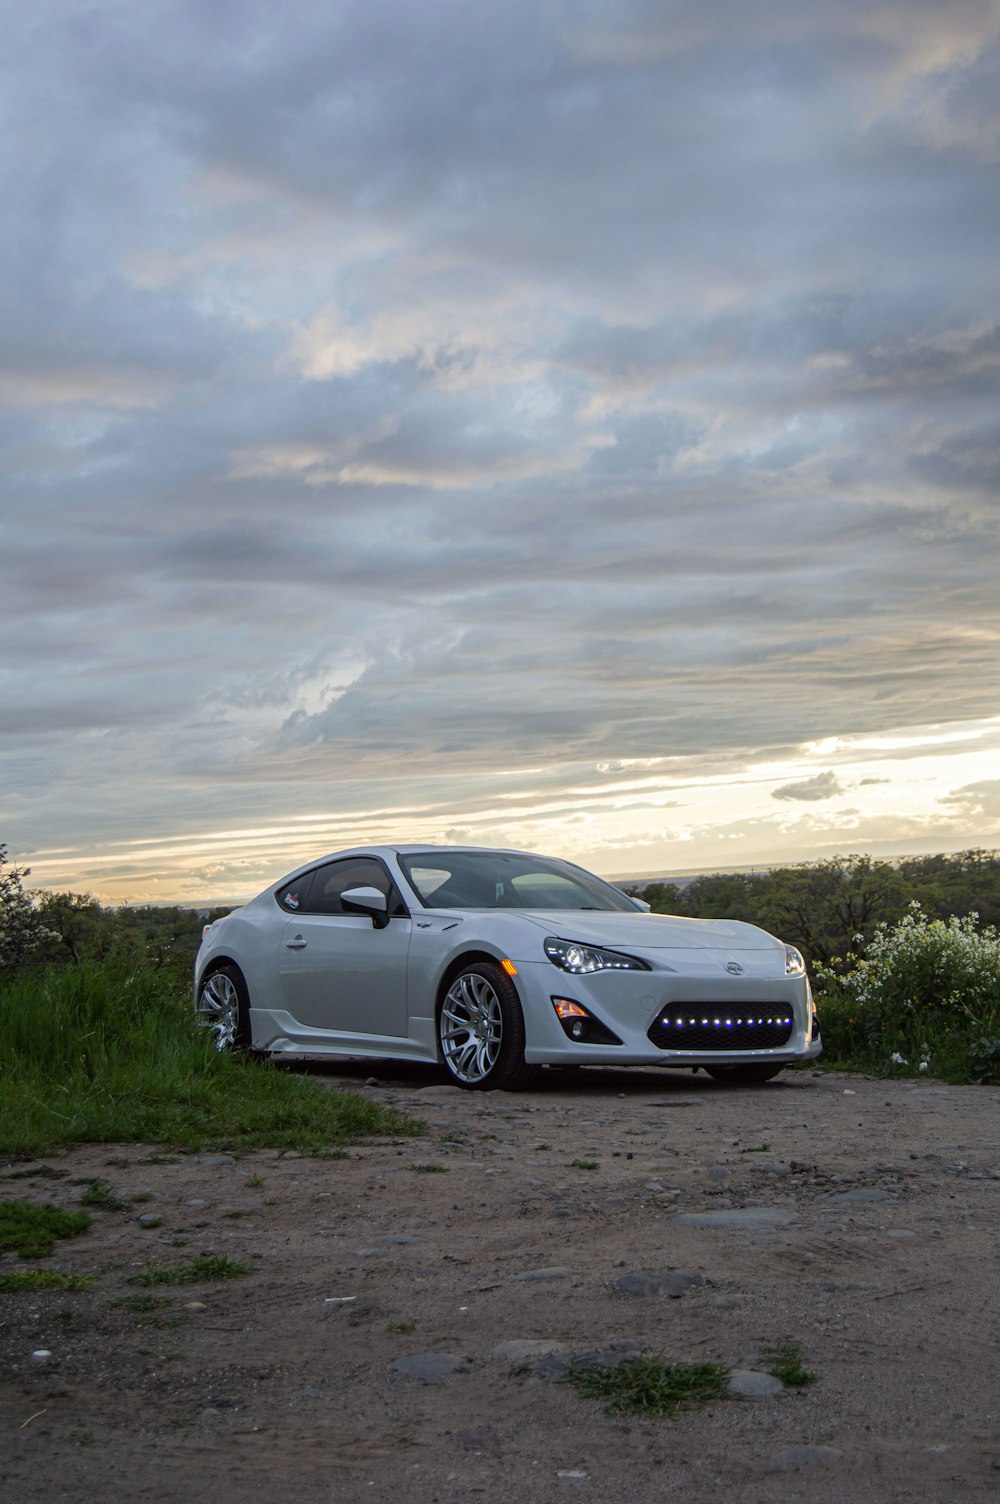 a white sports car parked on a dirt road